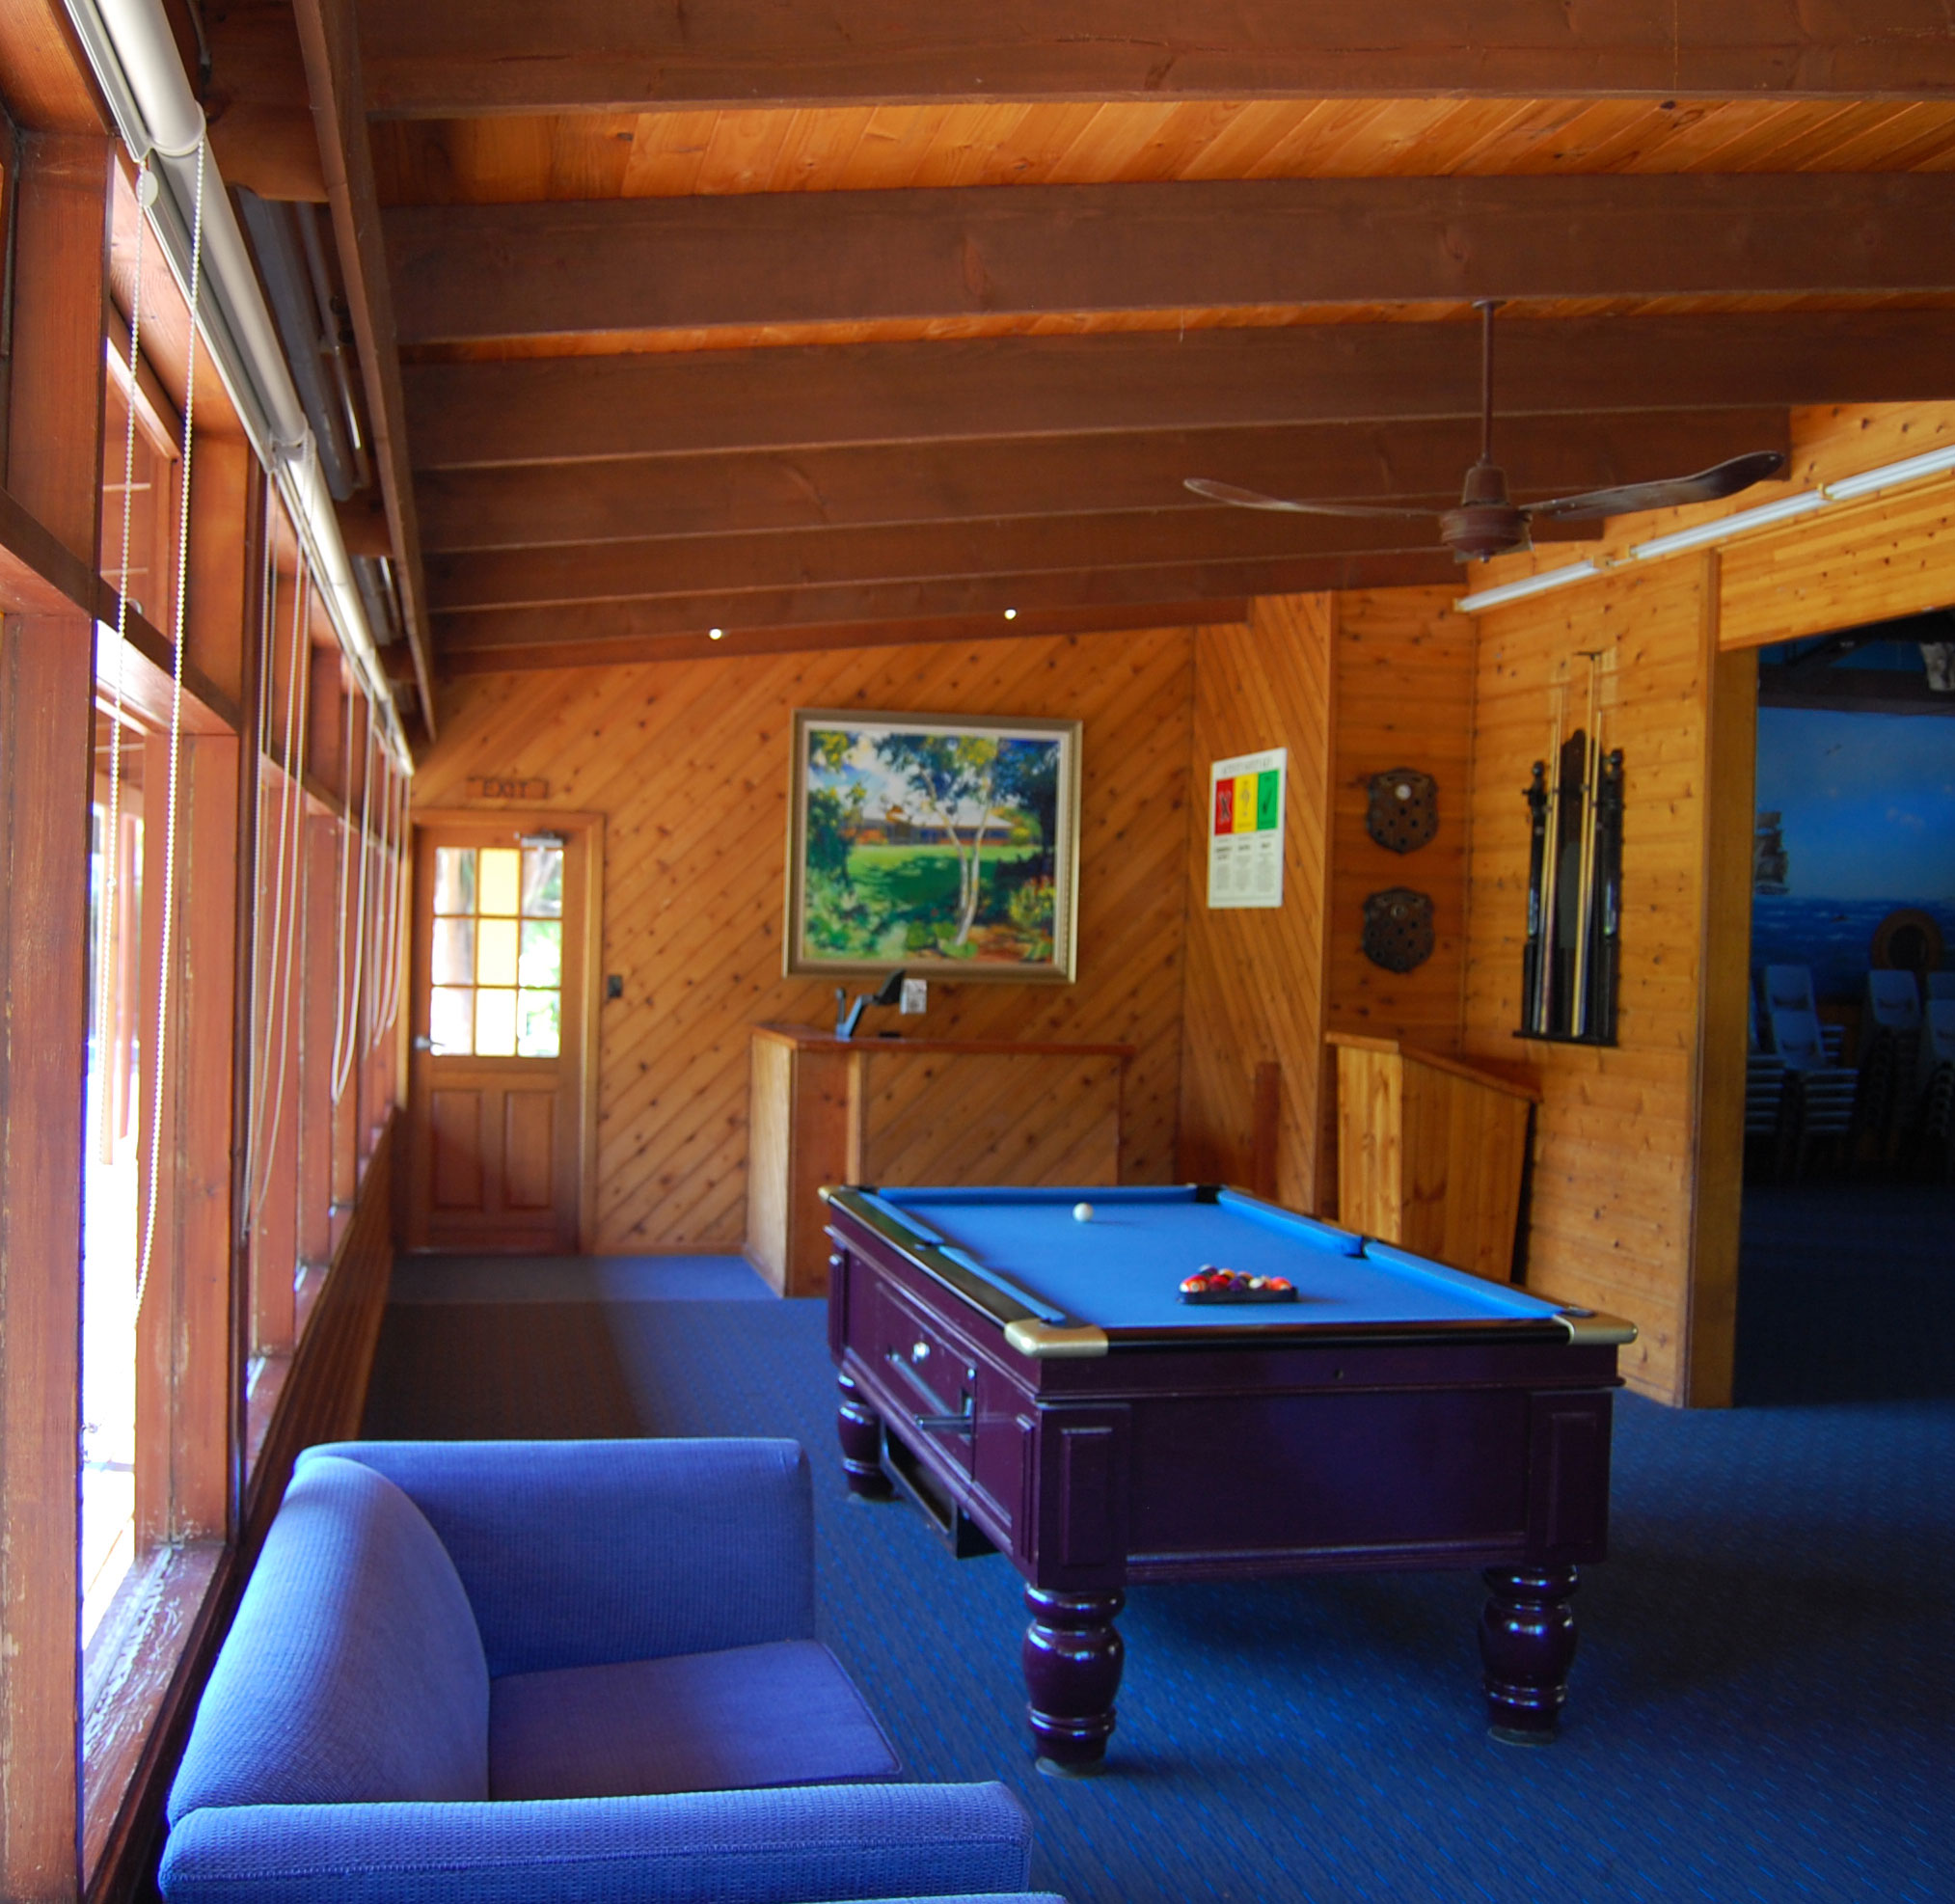 Image of the Reception area and Pool table